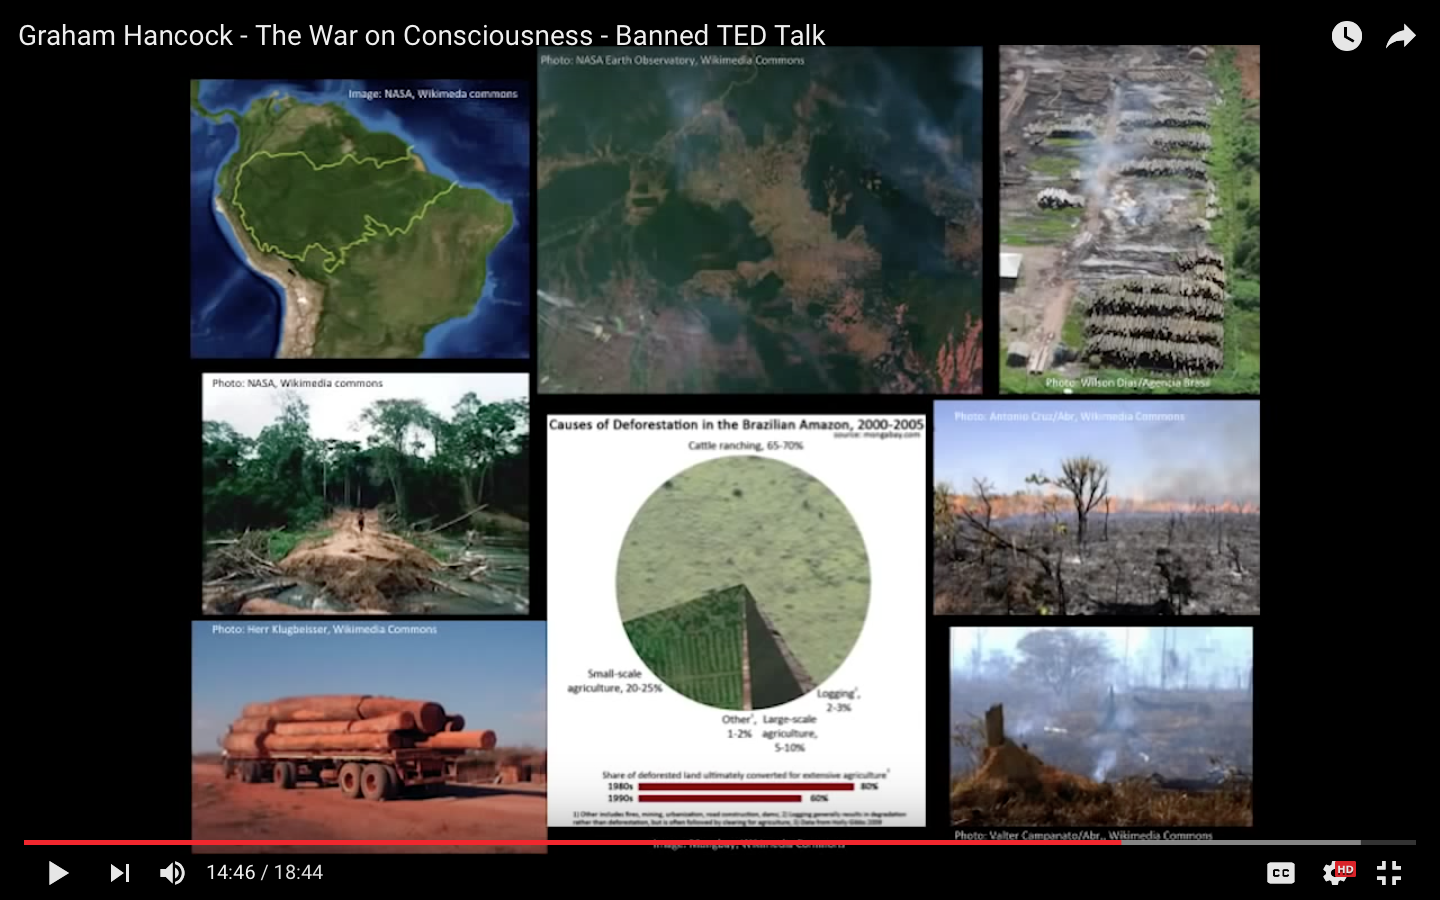 Graham Hancock - The War on Consciousness Amazon rainforest - the lungs of the earth - cleared to plant industrial soybean to feed cattle to make hamburgers.